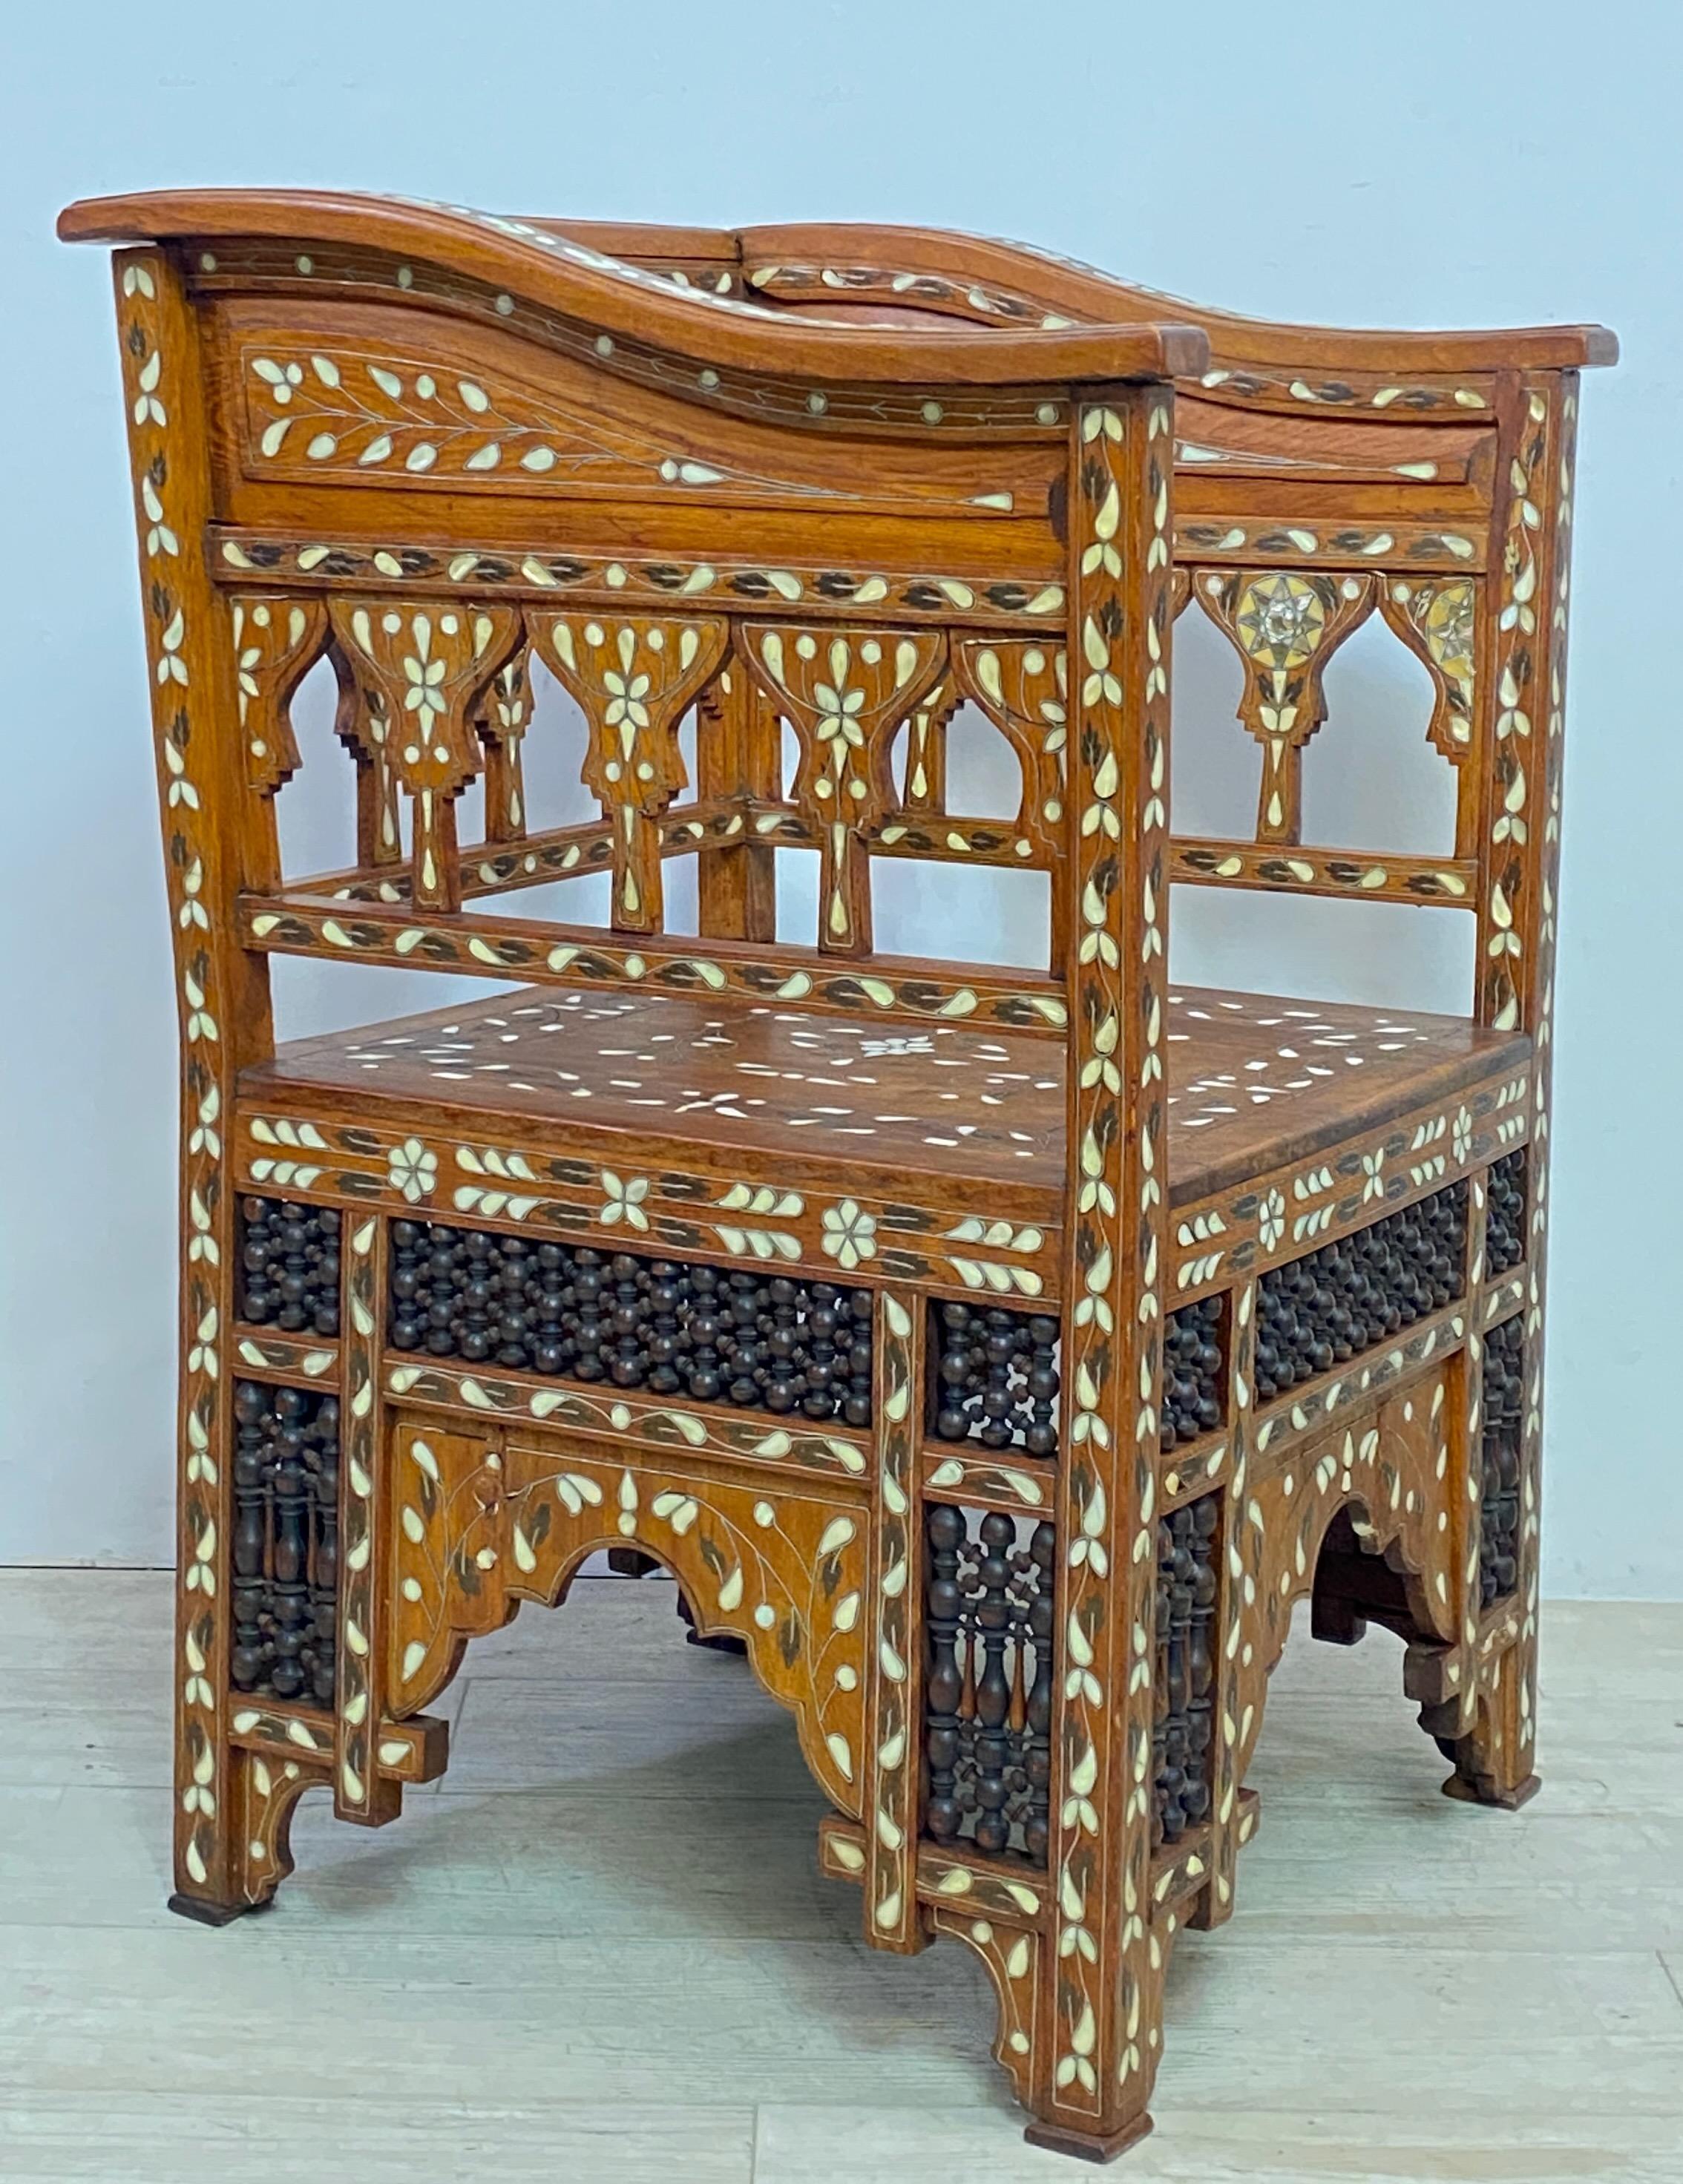 Brass Syrian Walnut Chair with Mixed Inlay, Late 19th-Early 20th Century  For Sale